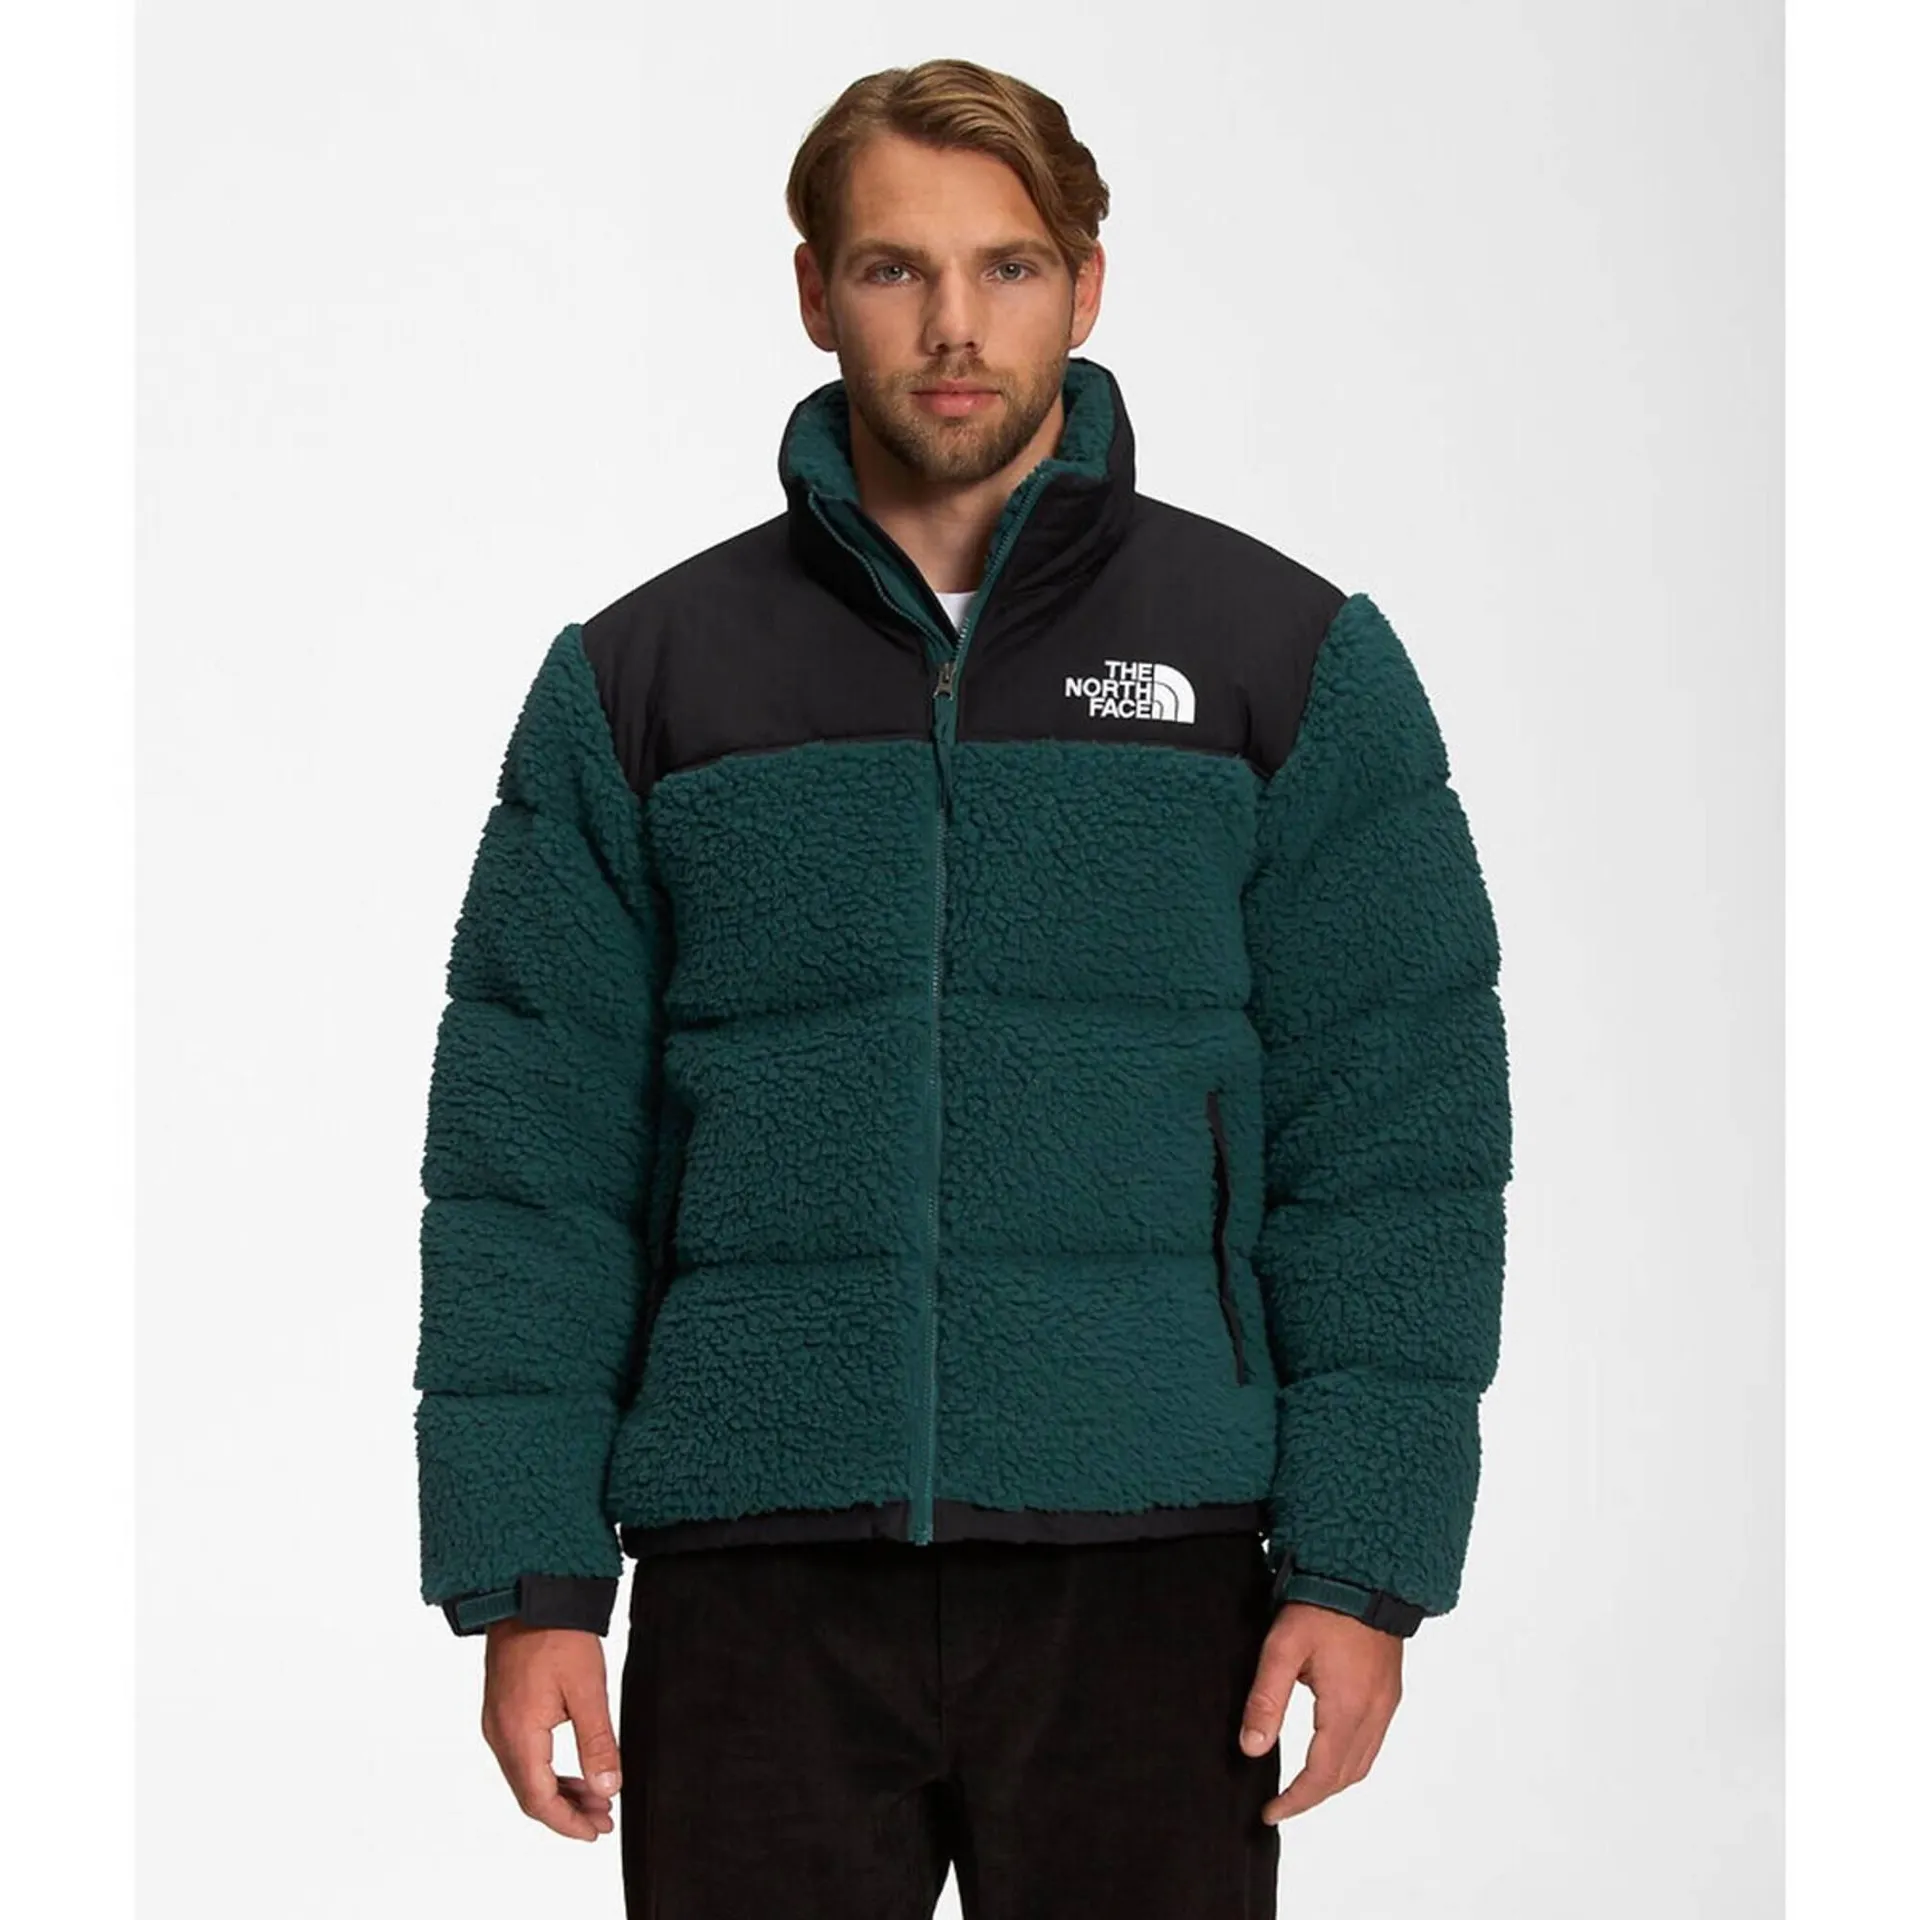 The North Face Catalogue - 2